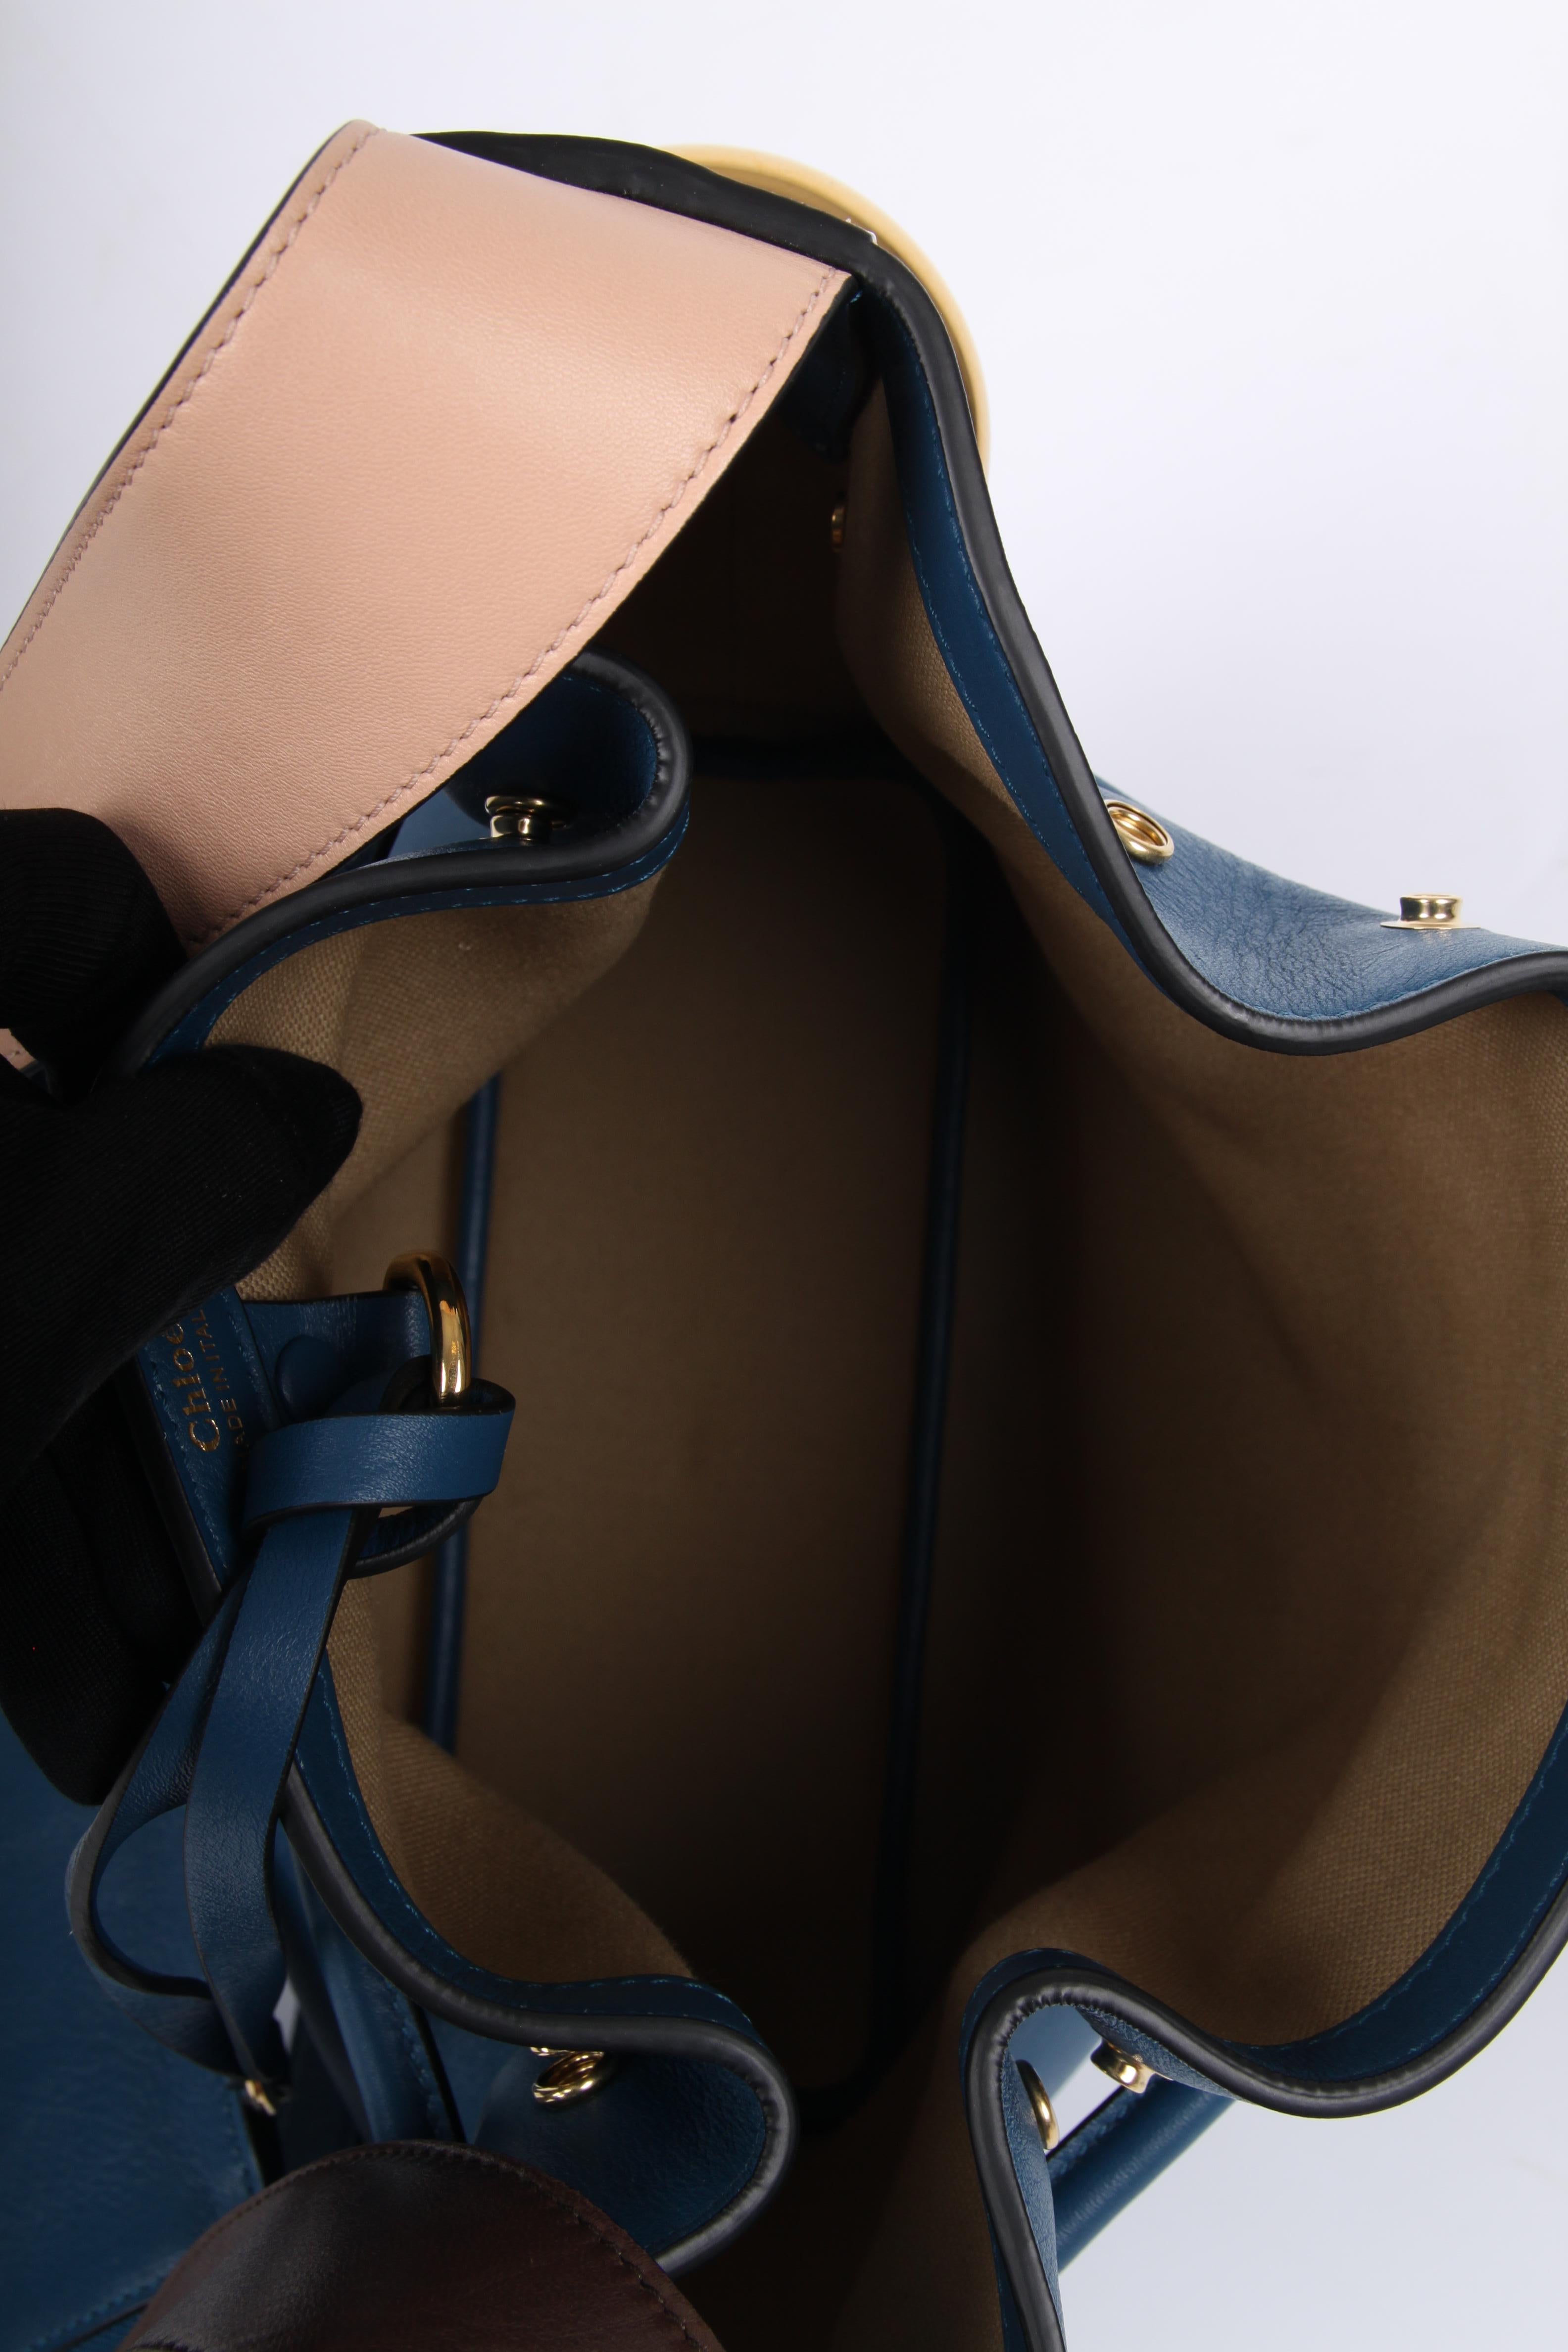 This Chloe bucket bag is made from exquisite factory blue calfskin with gold-tone hardware. Details include a brown leather shoulder strap, looping drawstring, and fully lined interior with a detachable pouch.  

Type of Material: CalfskinColor: